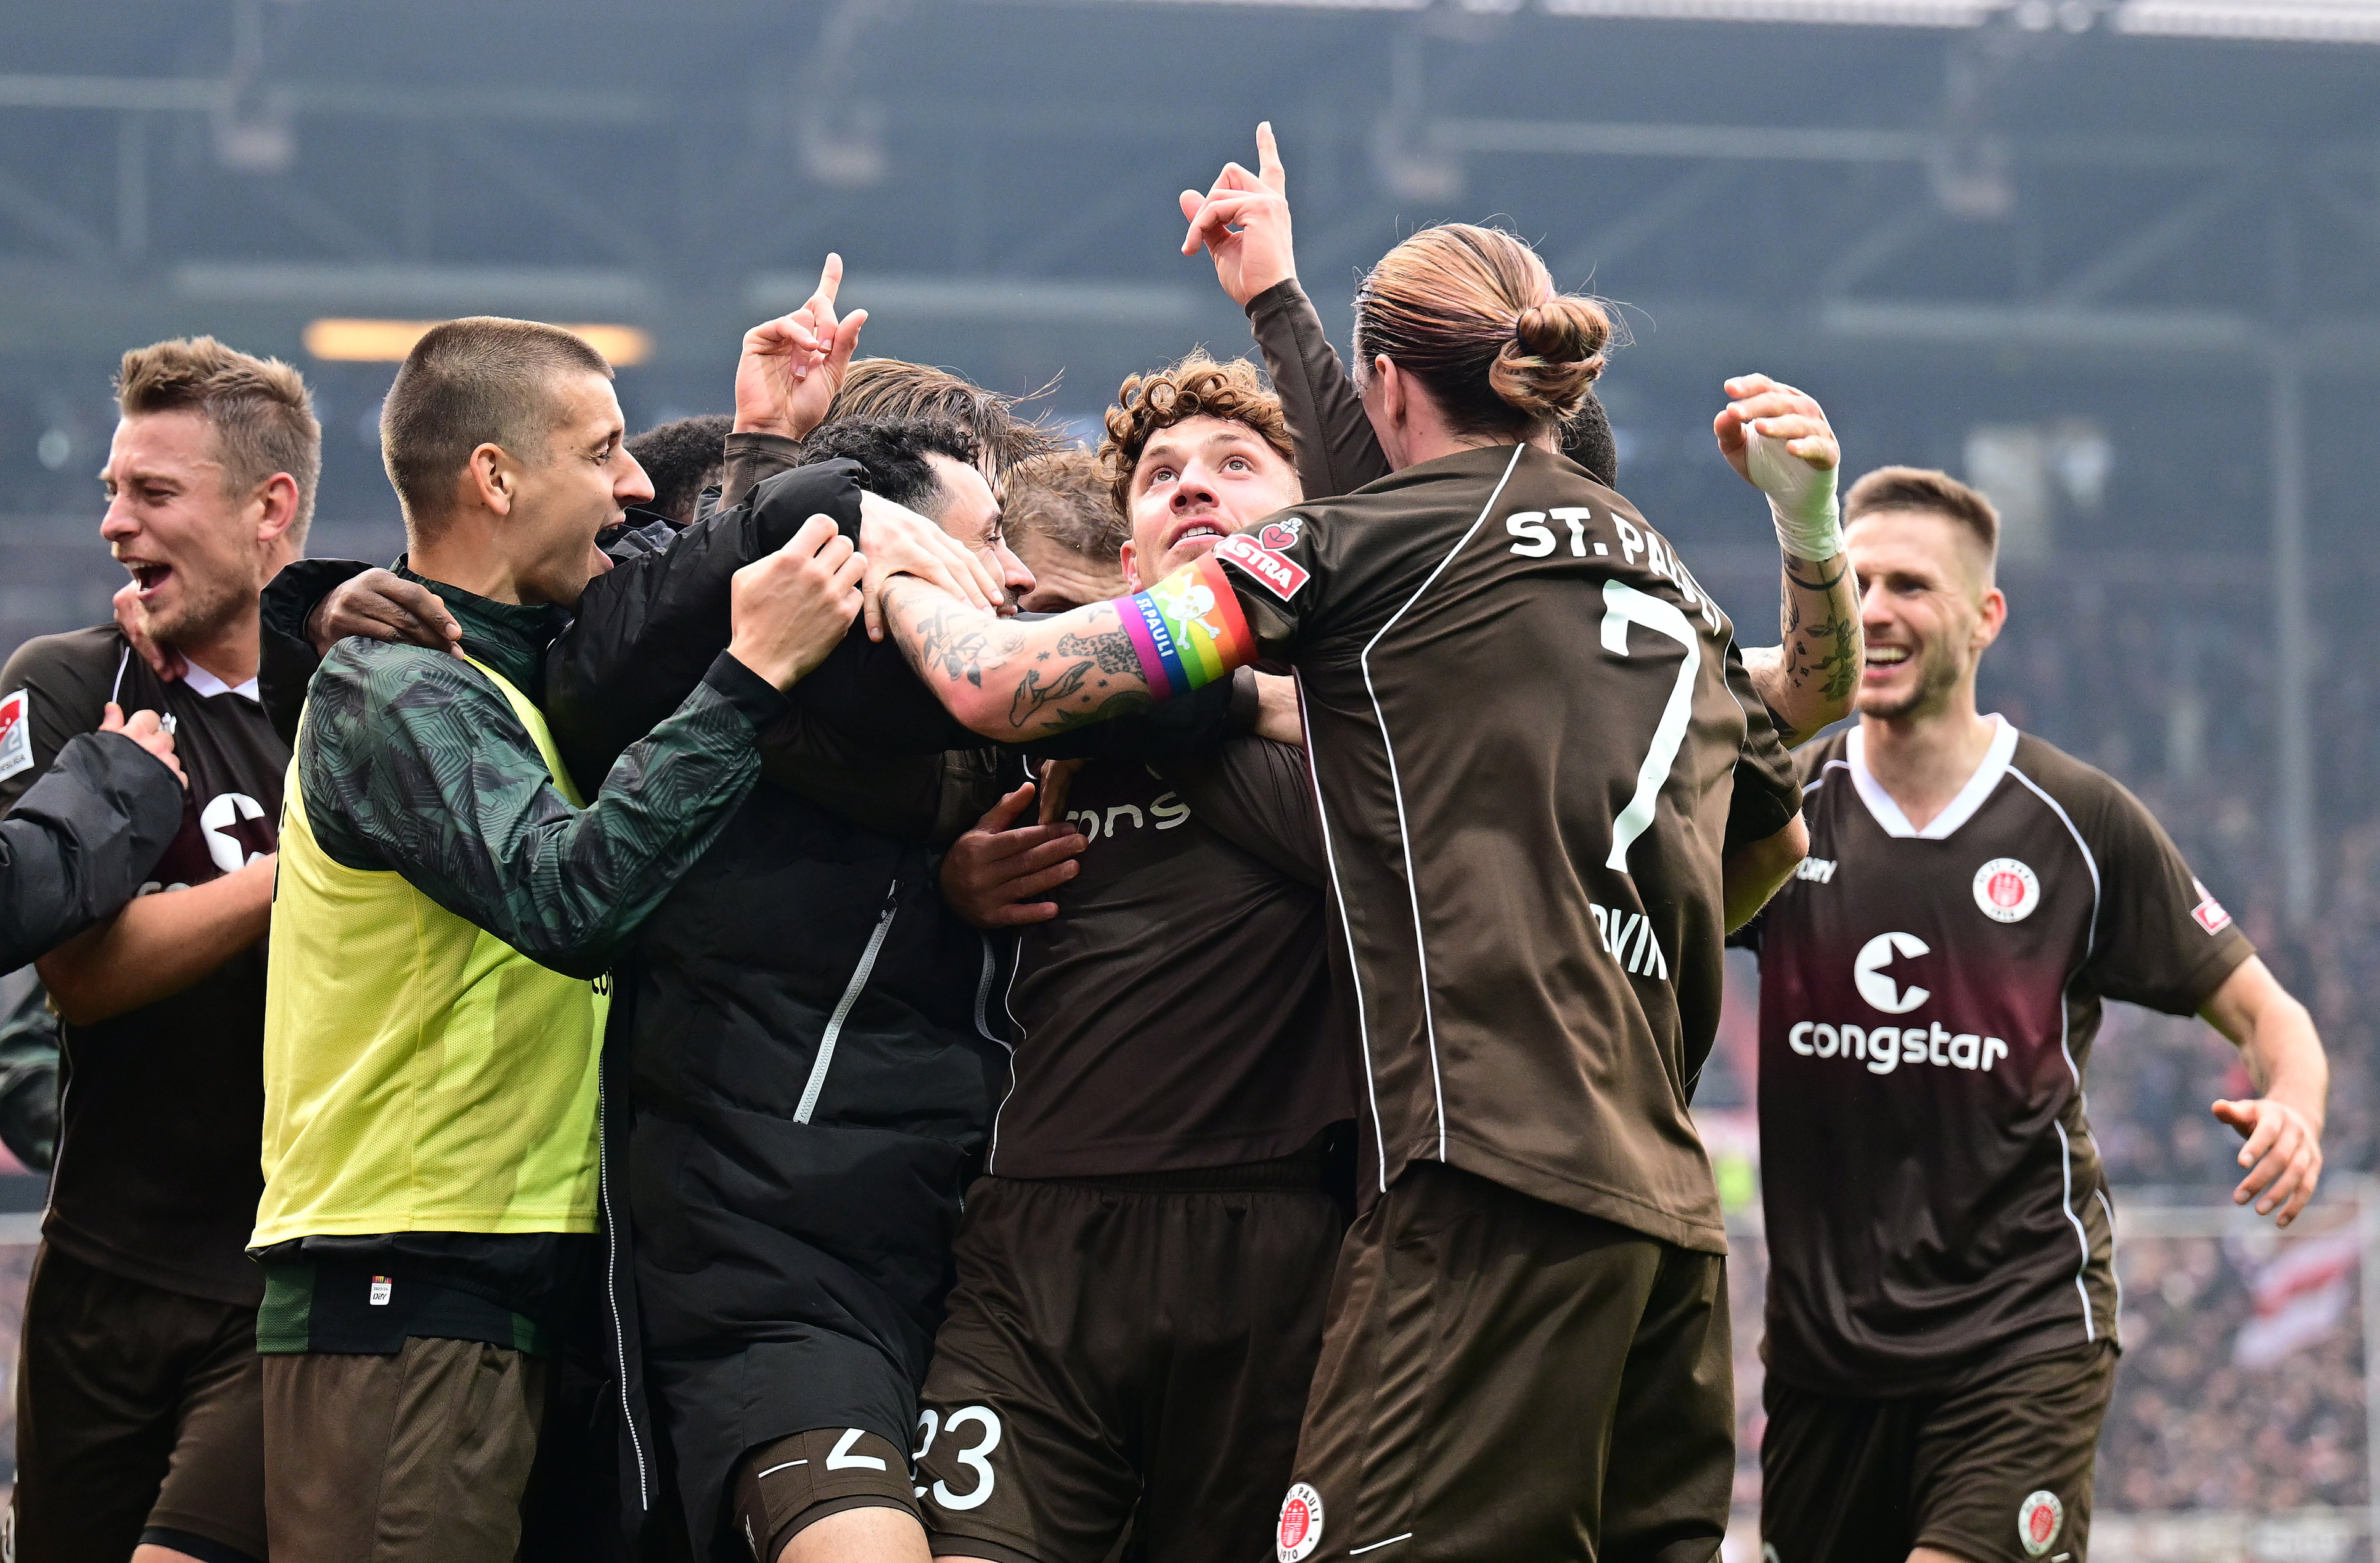 Philipp Treu is mobbed after scoring the winner in the 2-1 defeat of Karlsruhe